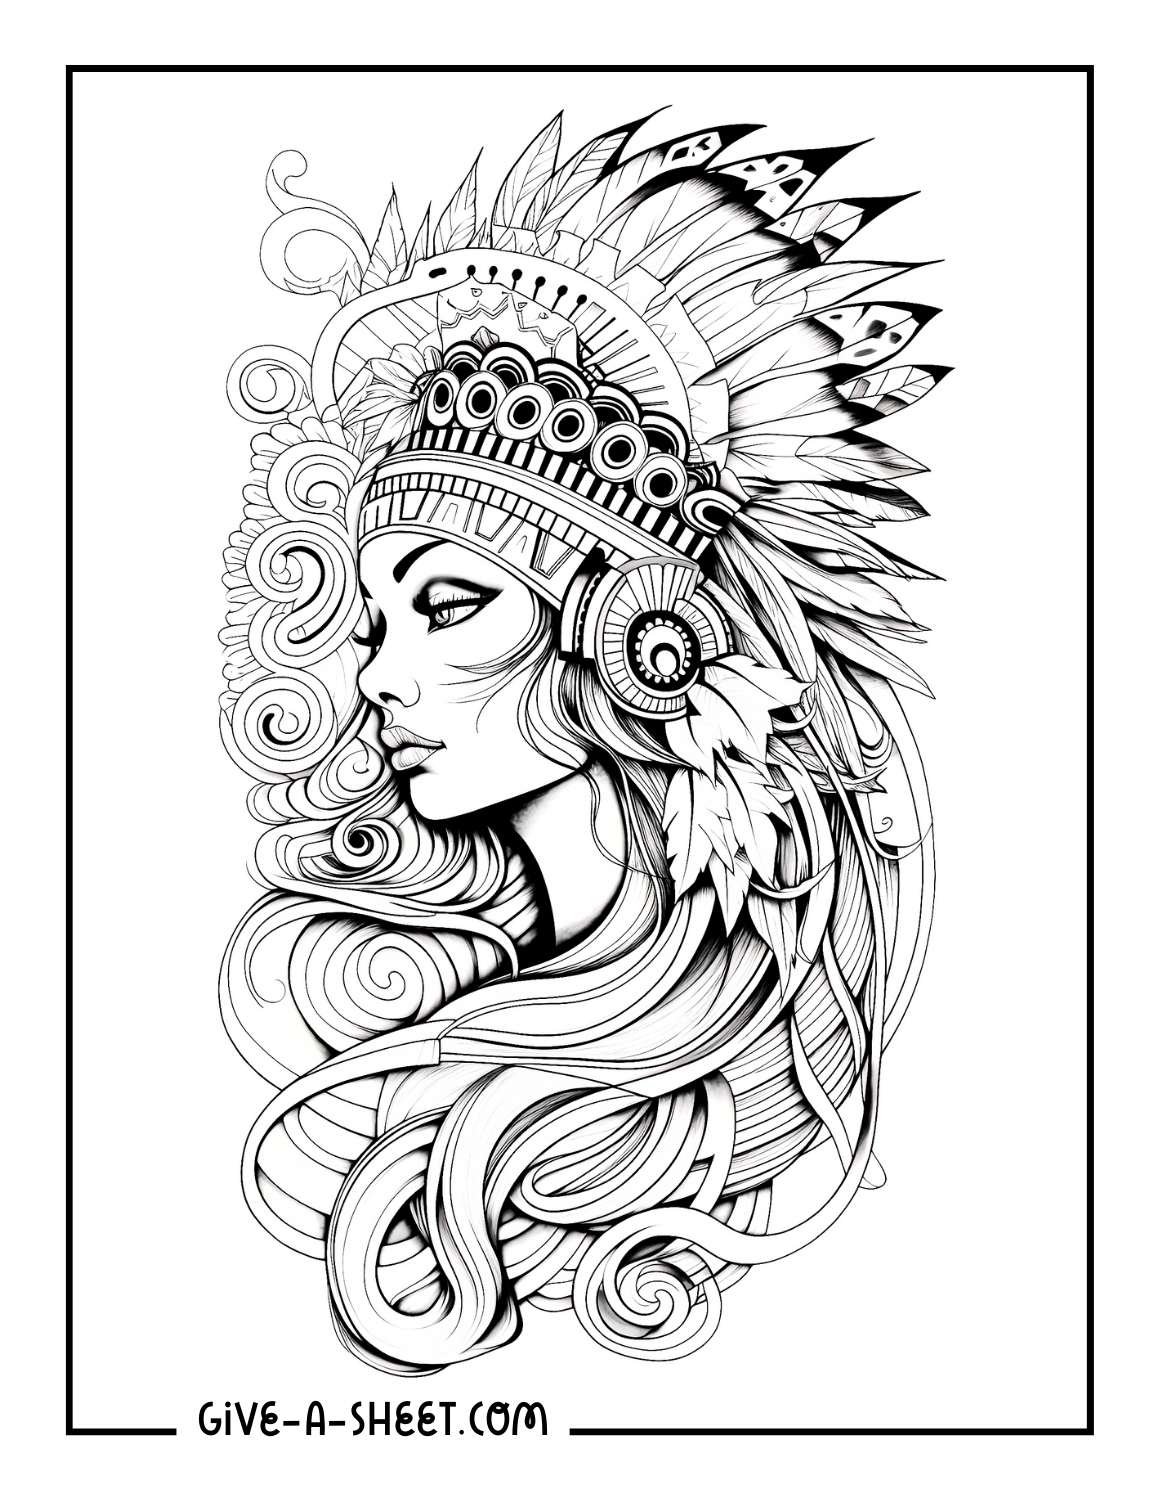 Tribal Goddess Tattoo coloring page for adults.